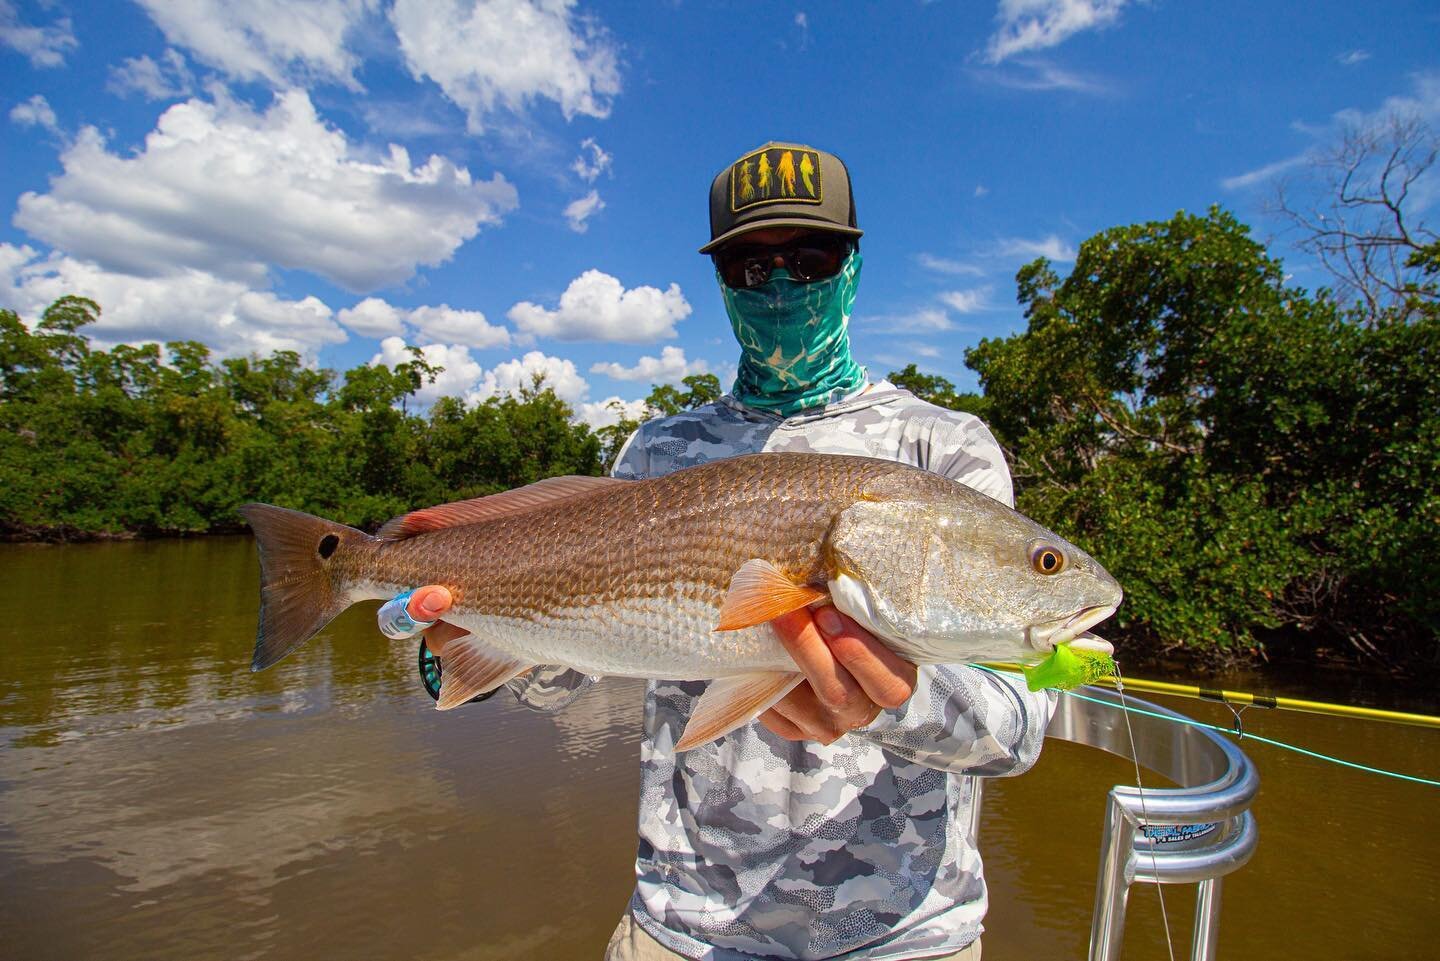 First redfish on fly today for @connorwesterheide followed by his second, third, and fourth to finish the trip!#flyfishingmarcoisland#flyfishing#redfishonfly#hellsbayboatworks#hbbiscayne